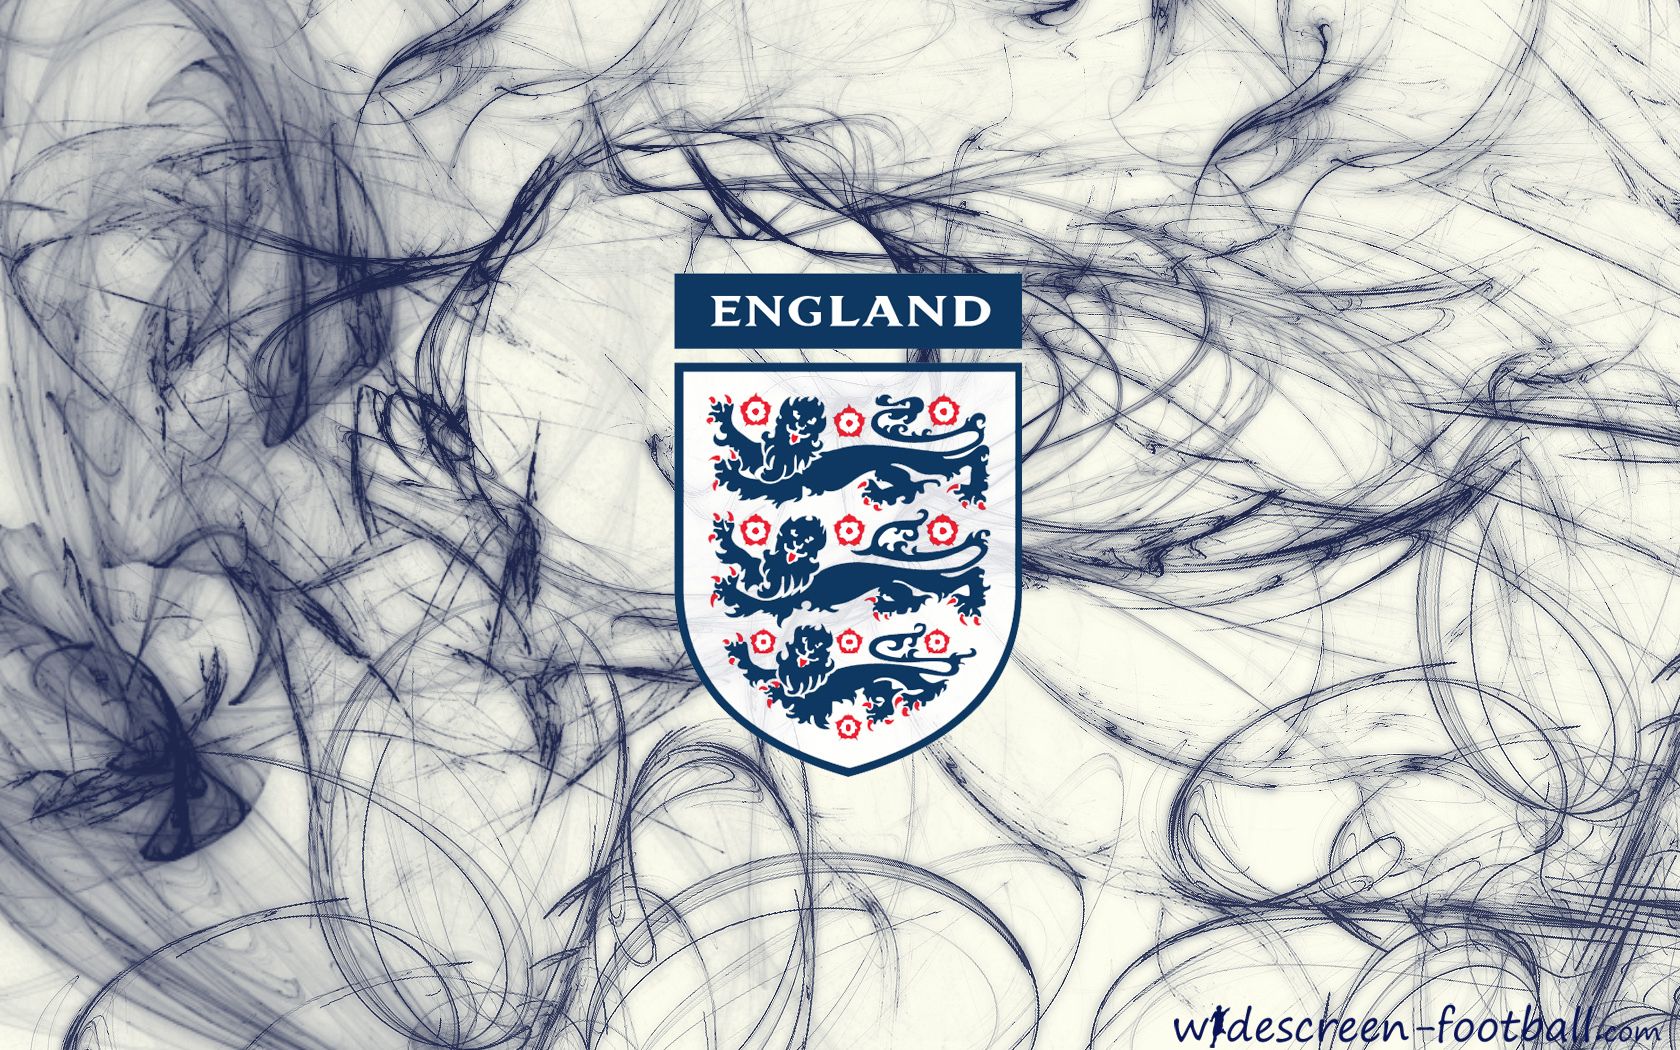 England World Picture. World picture, National football teams, Team wallpaper